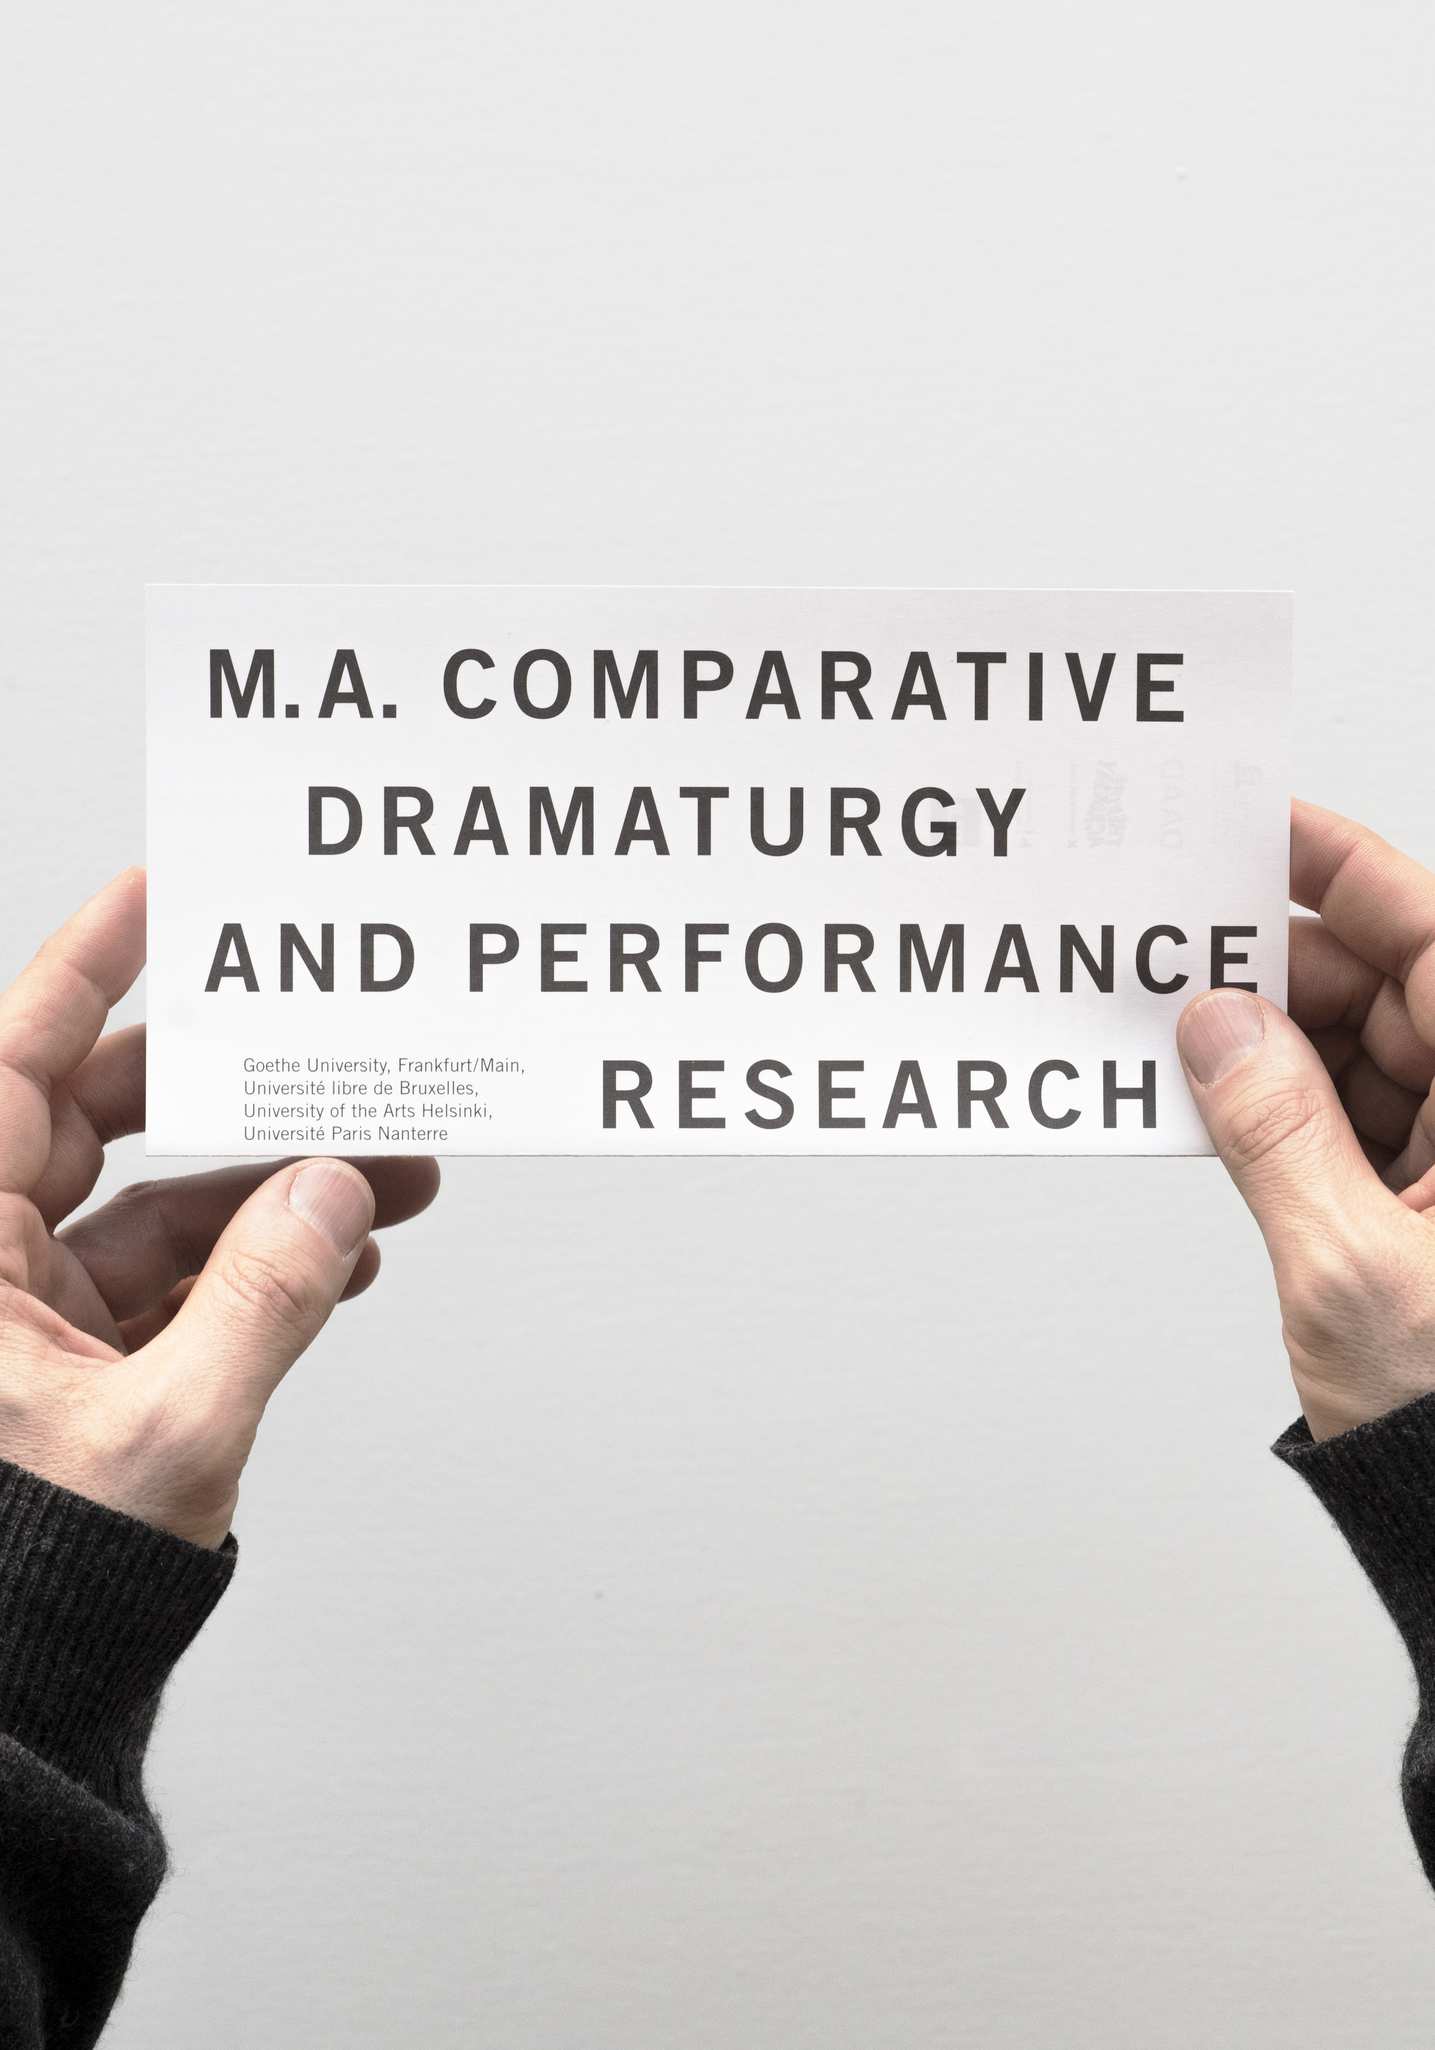 ma-comparative-dramaturgy-and-performance-research-flyer-1-1435x2050px